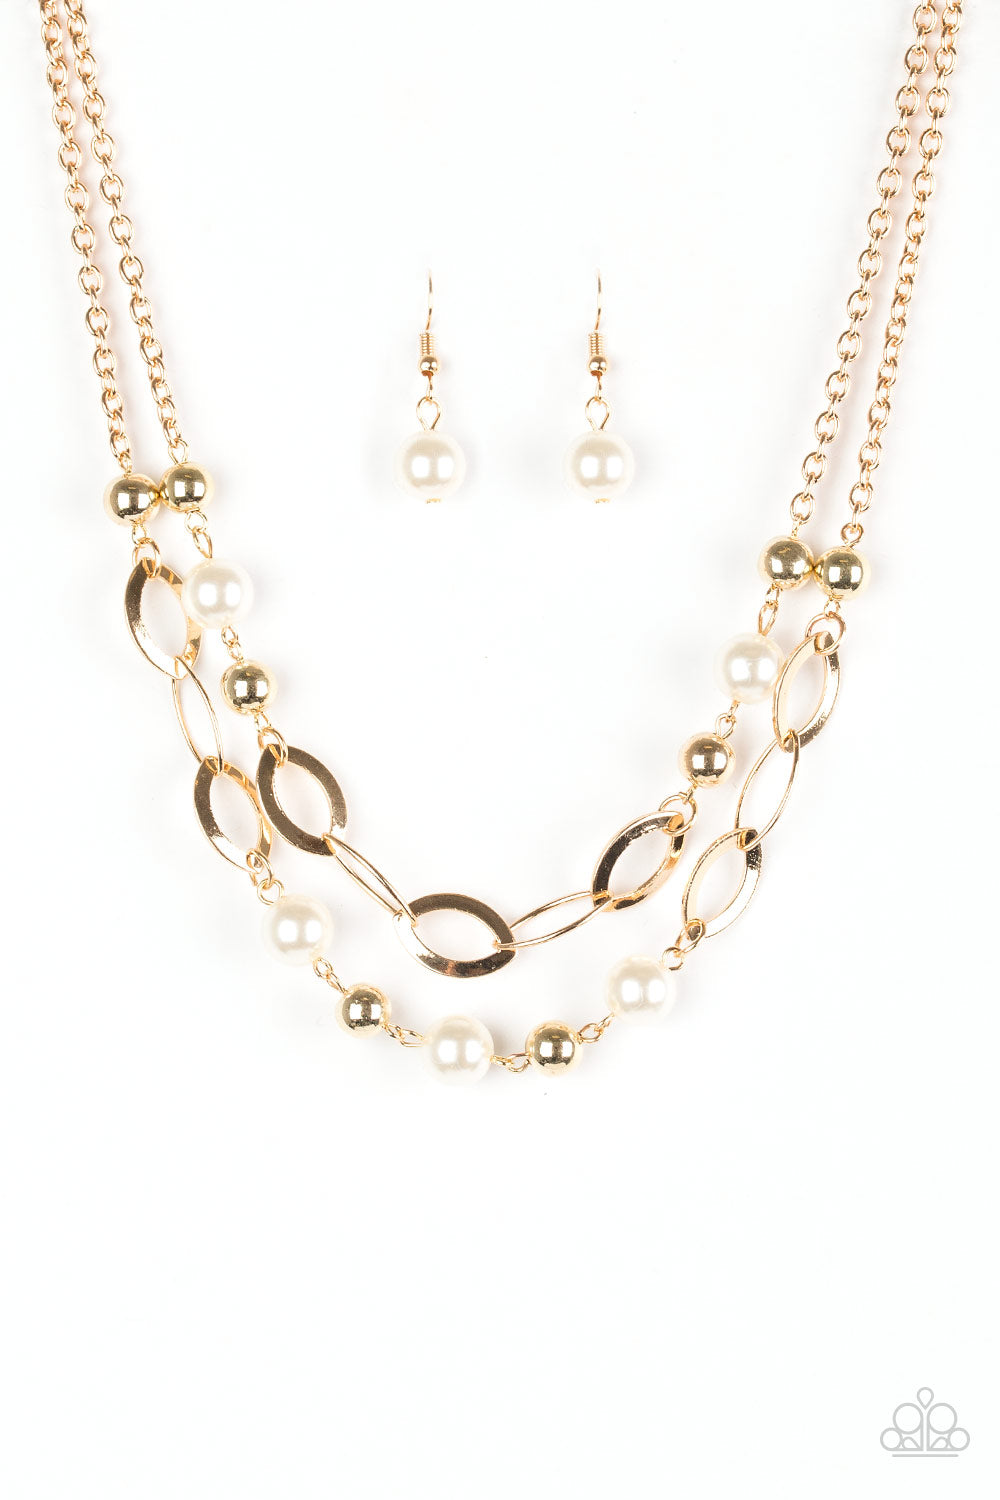 Paparazzi necklace - GLIMMER Takes All - Gold